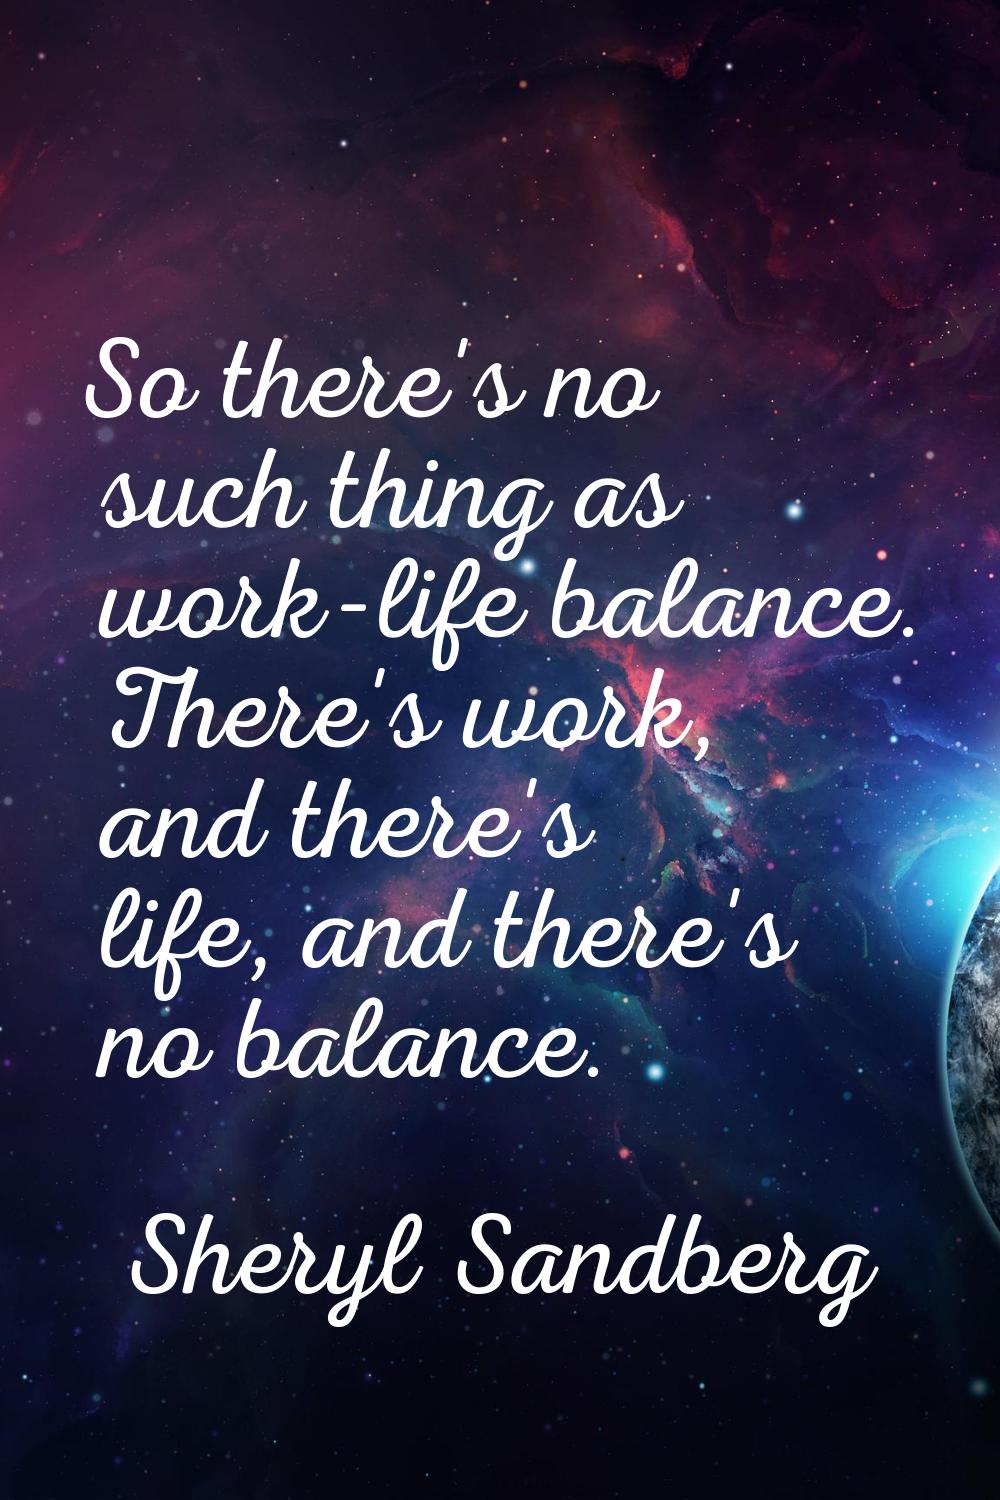 So there's no such thing as work-life balance. There's work, and there's life, and there's no balan